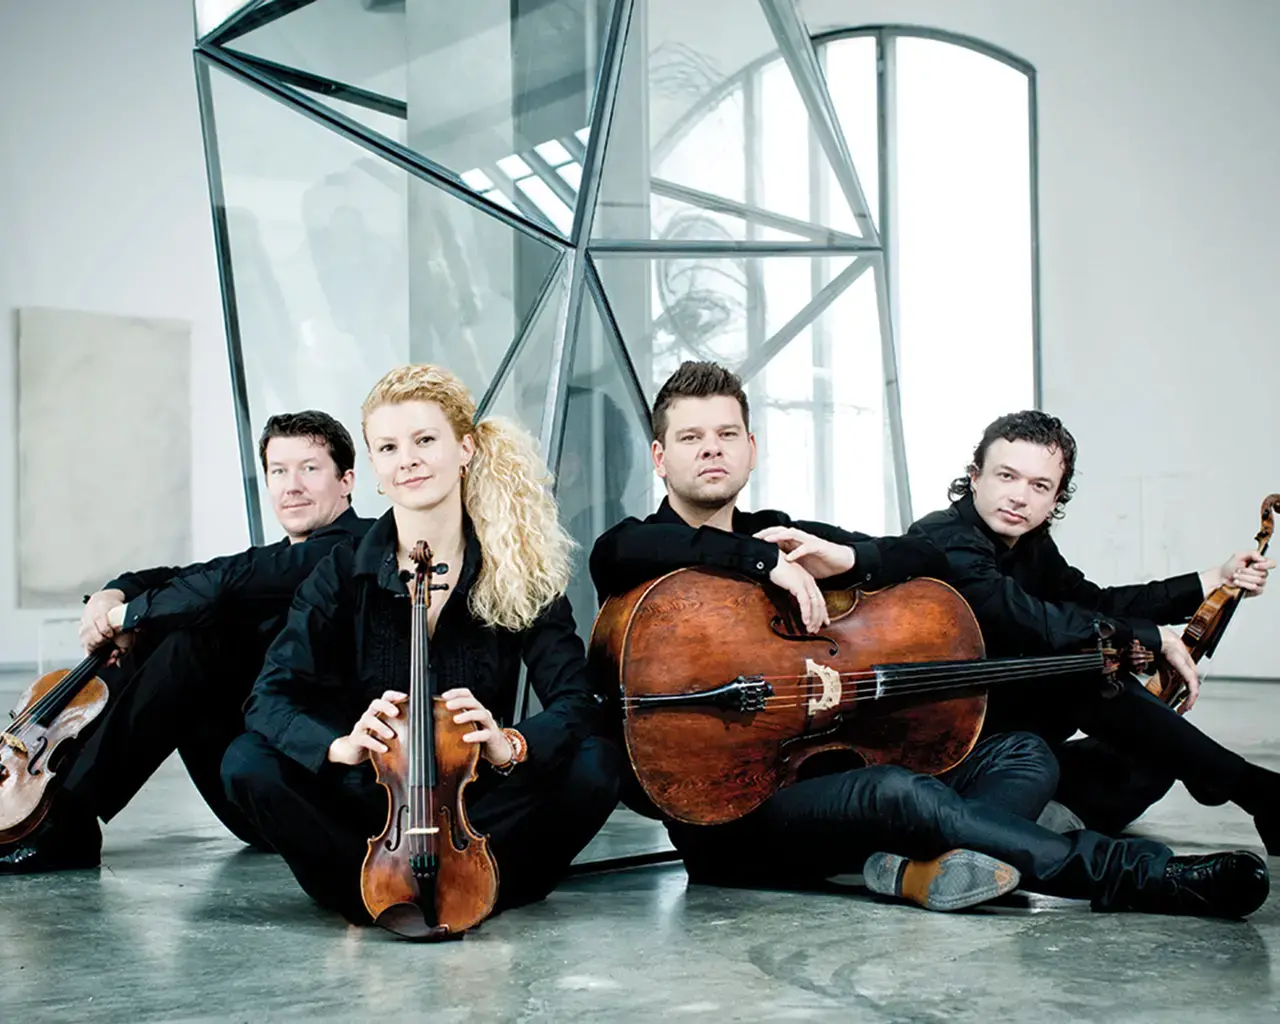 The Pavel Haas Quartet of the Czech Republic returns as one of 15 international string quartets&lt;br /&gt;Philadelphia Chamber Music Society presents in its 30th season. Photo by Marco Borggreve. Courtesy of the Philadelphia Chamber Music Society.&lt;br /&gt;&nbsp;